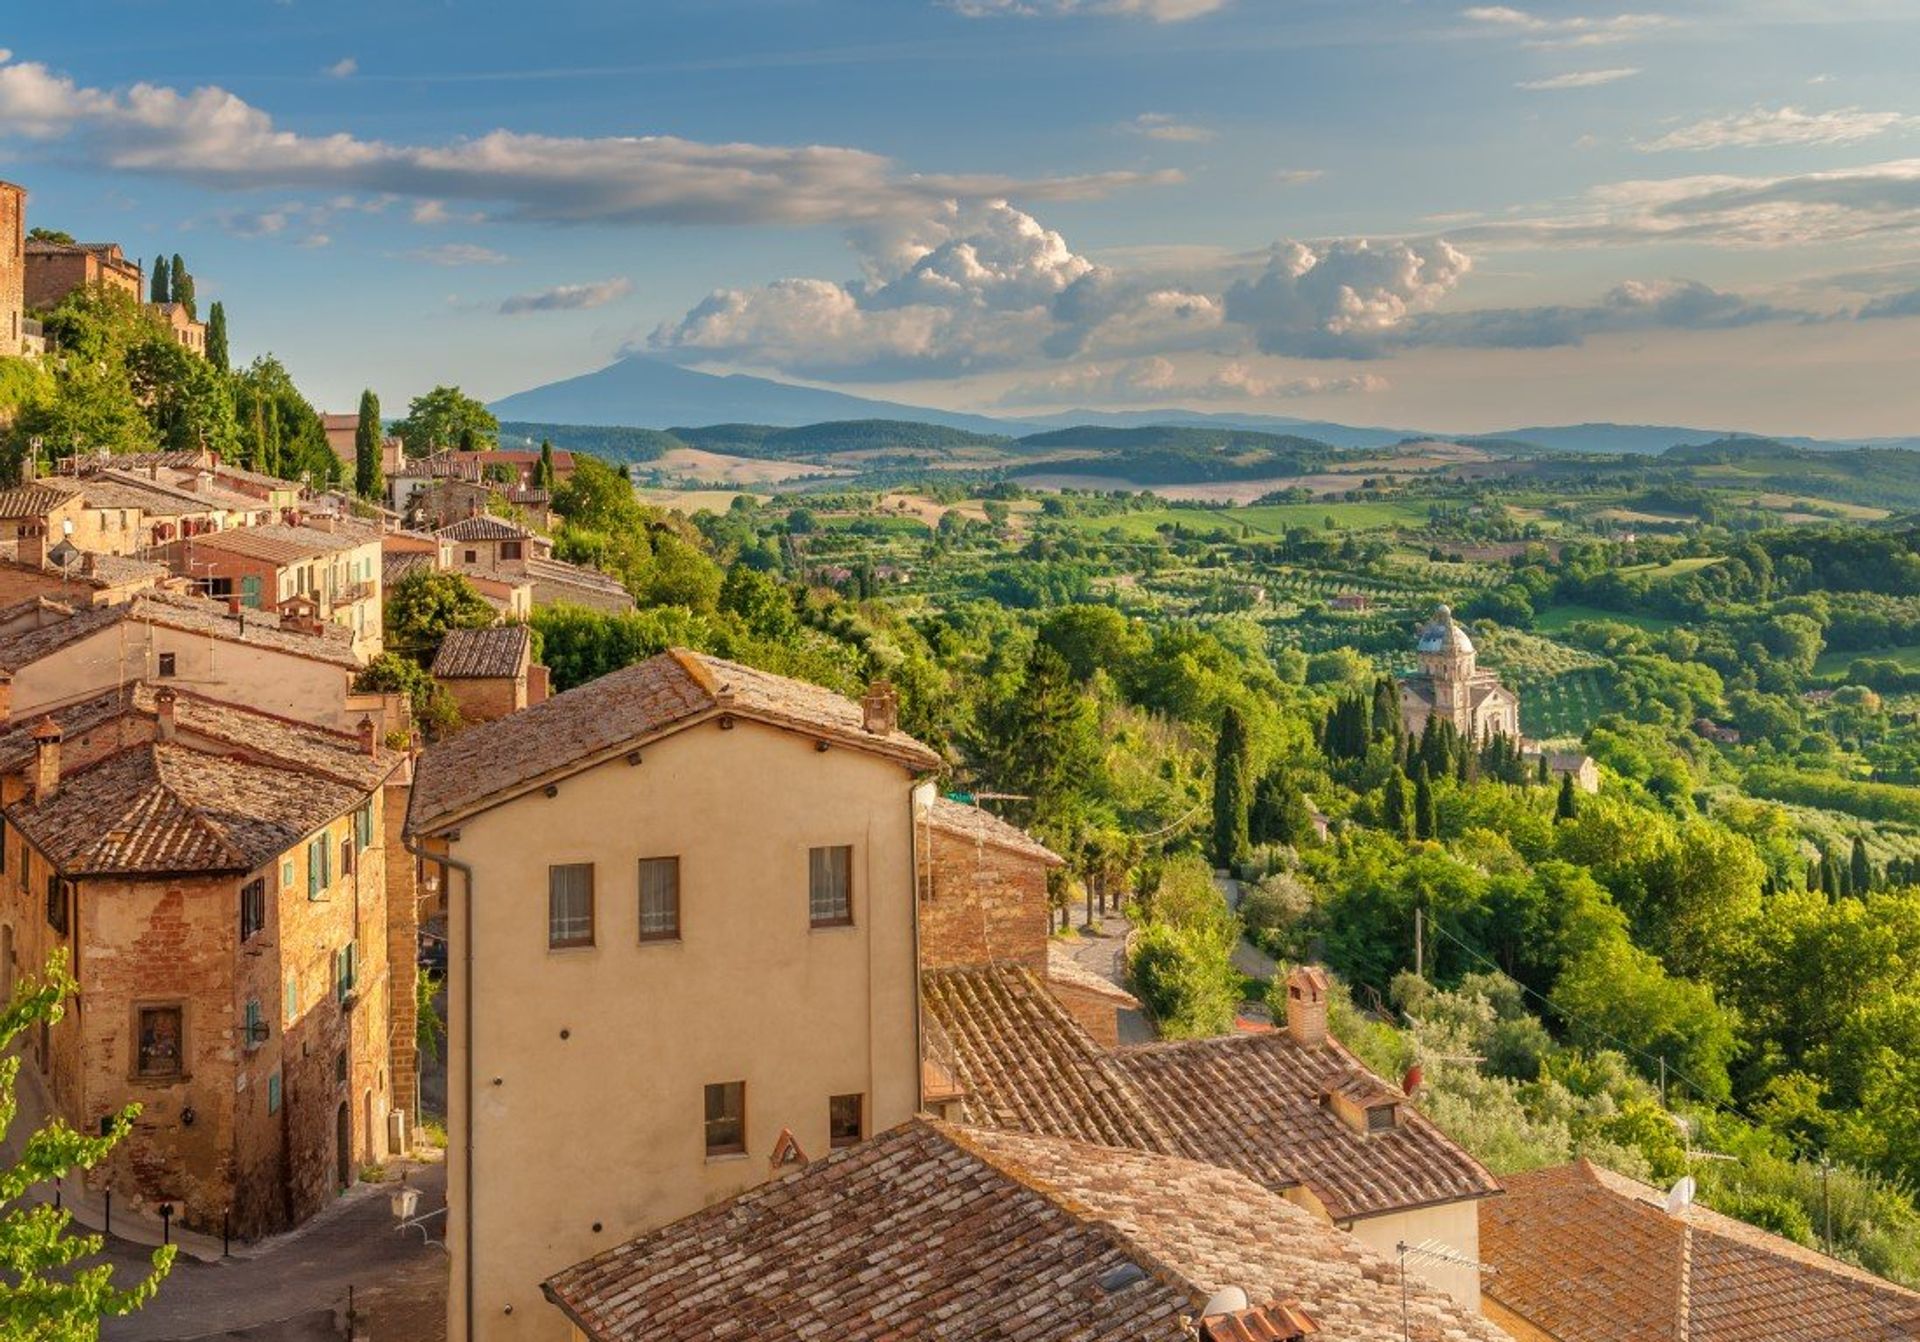 The Tuscan countryside is famous for producing some of the world's most delicious red wines